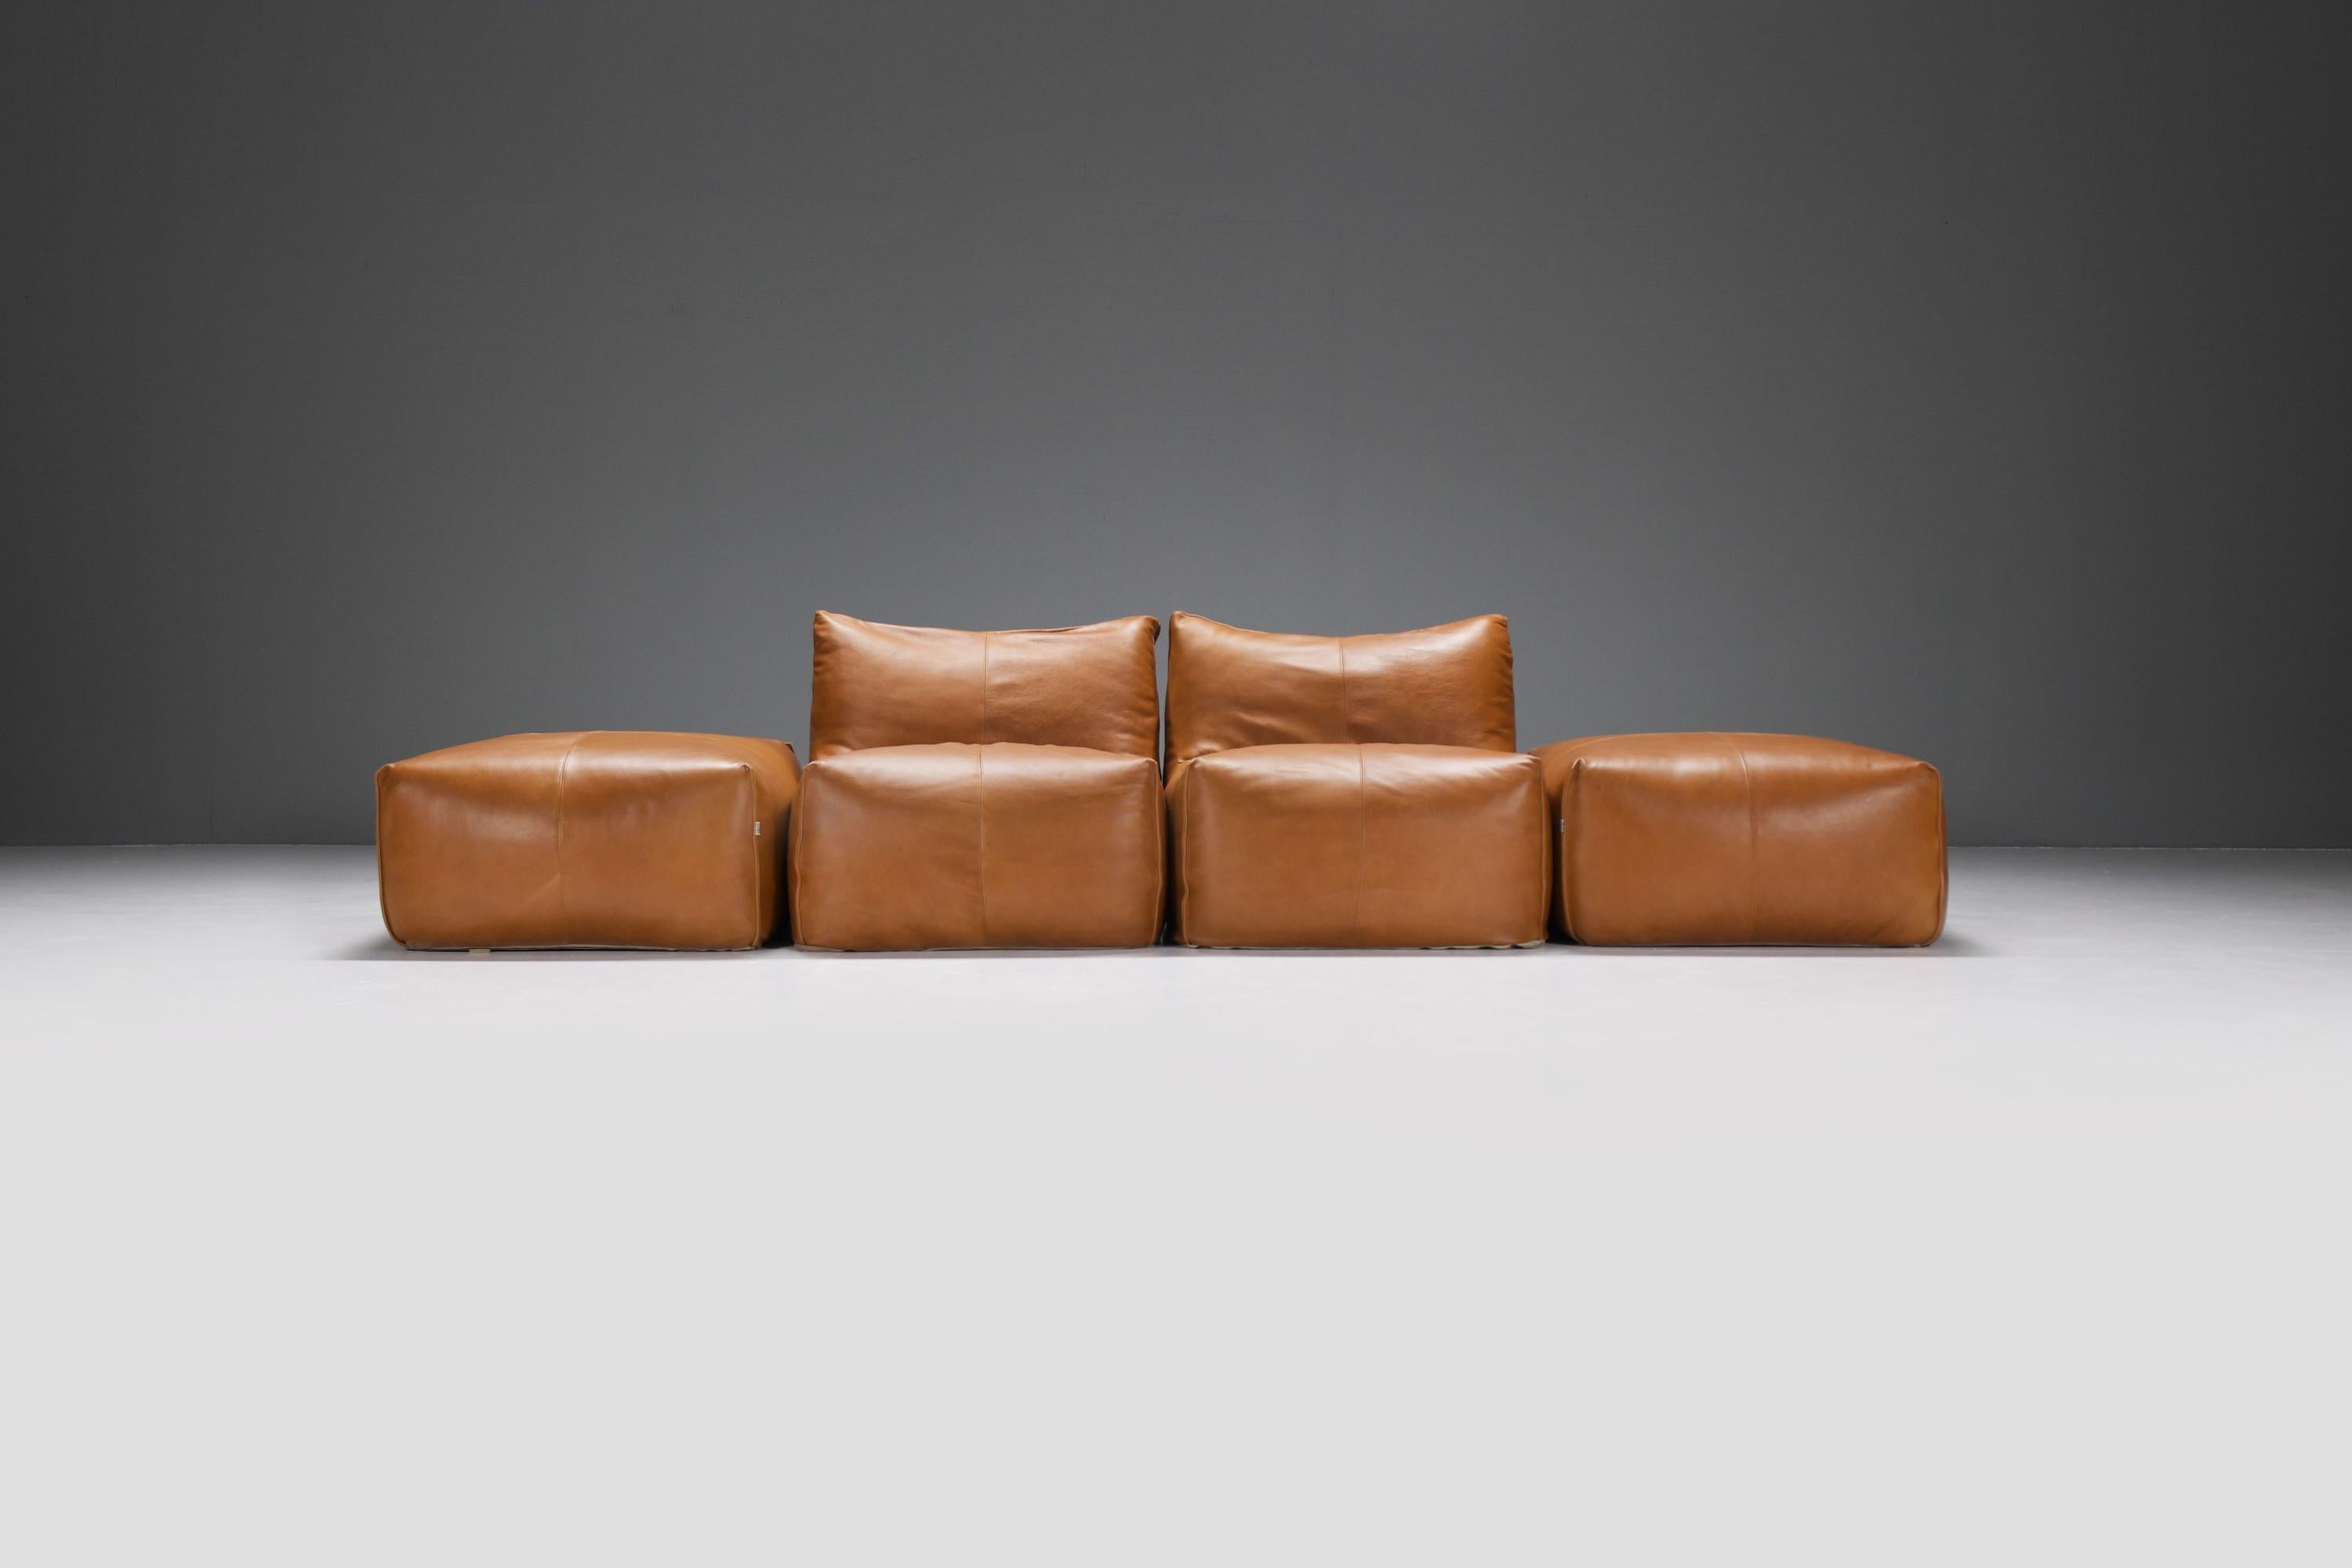 Stunning vintage ‘Le Bambolé’ living room set in new cognac leather.Designed by Mario Bellini for B & B Italia.

Le Bambole series won the Compasso d'Oro award in 1979.  It is an iconic piece of Italian design. Included in the permanent collection